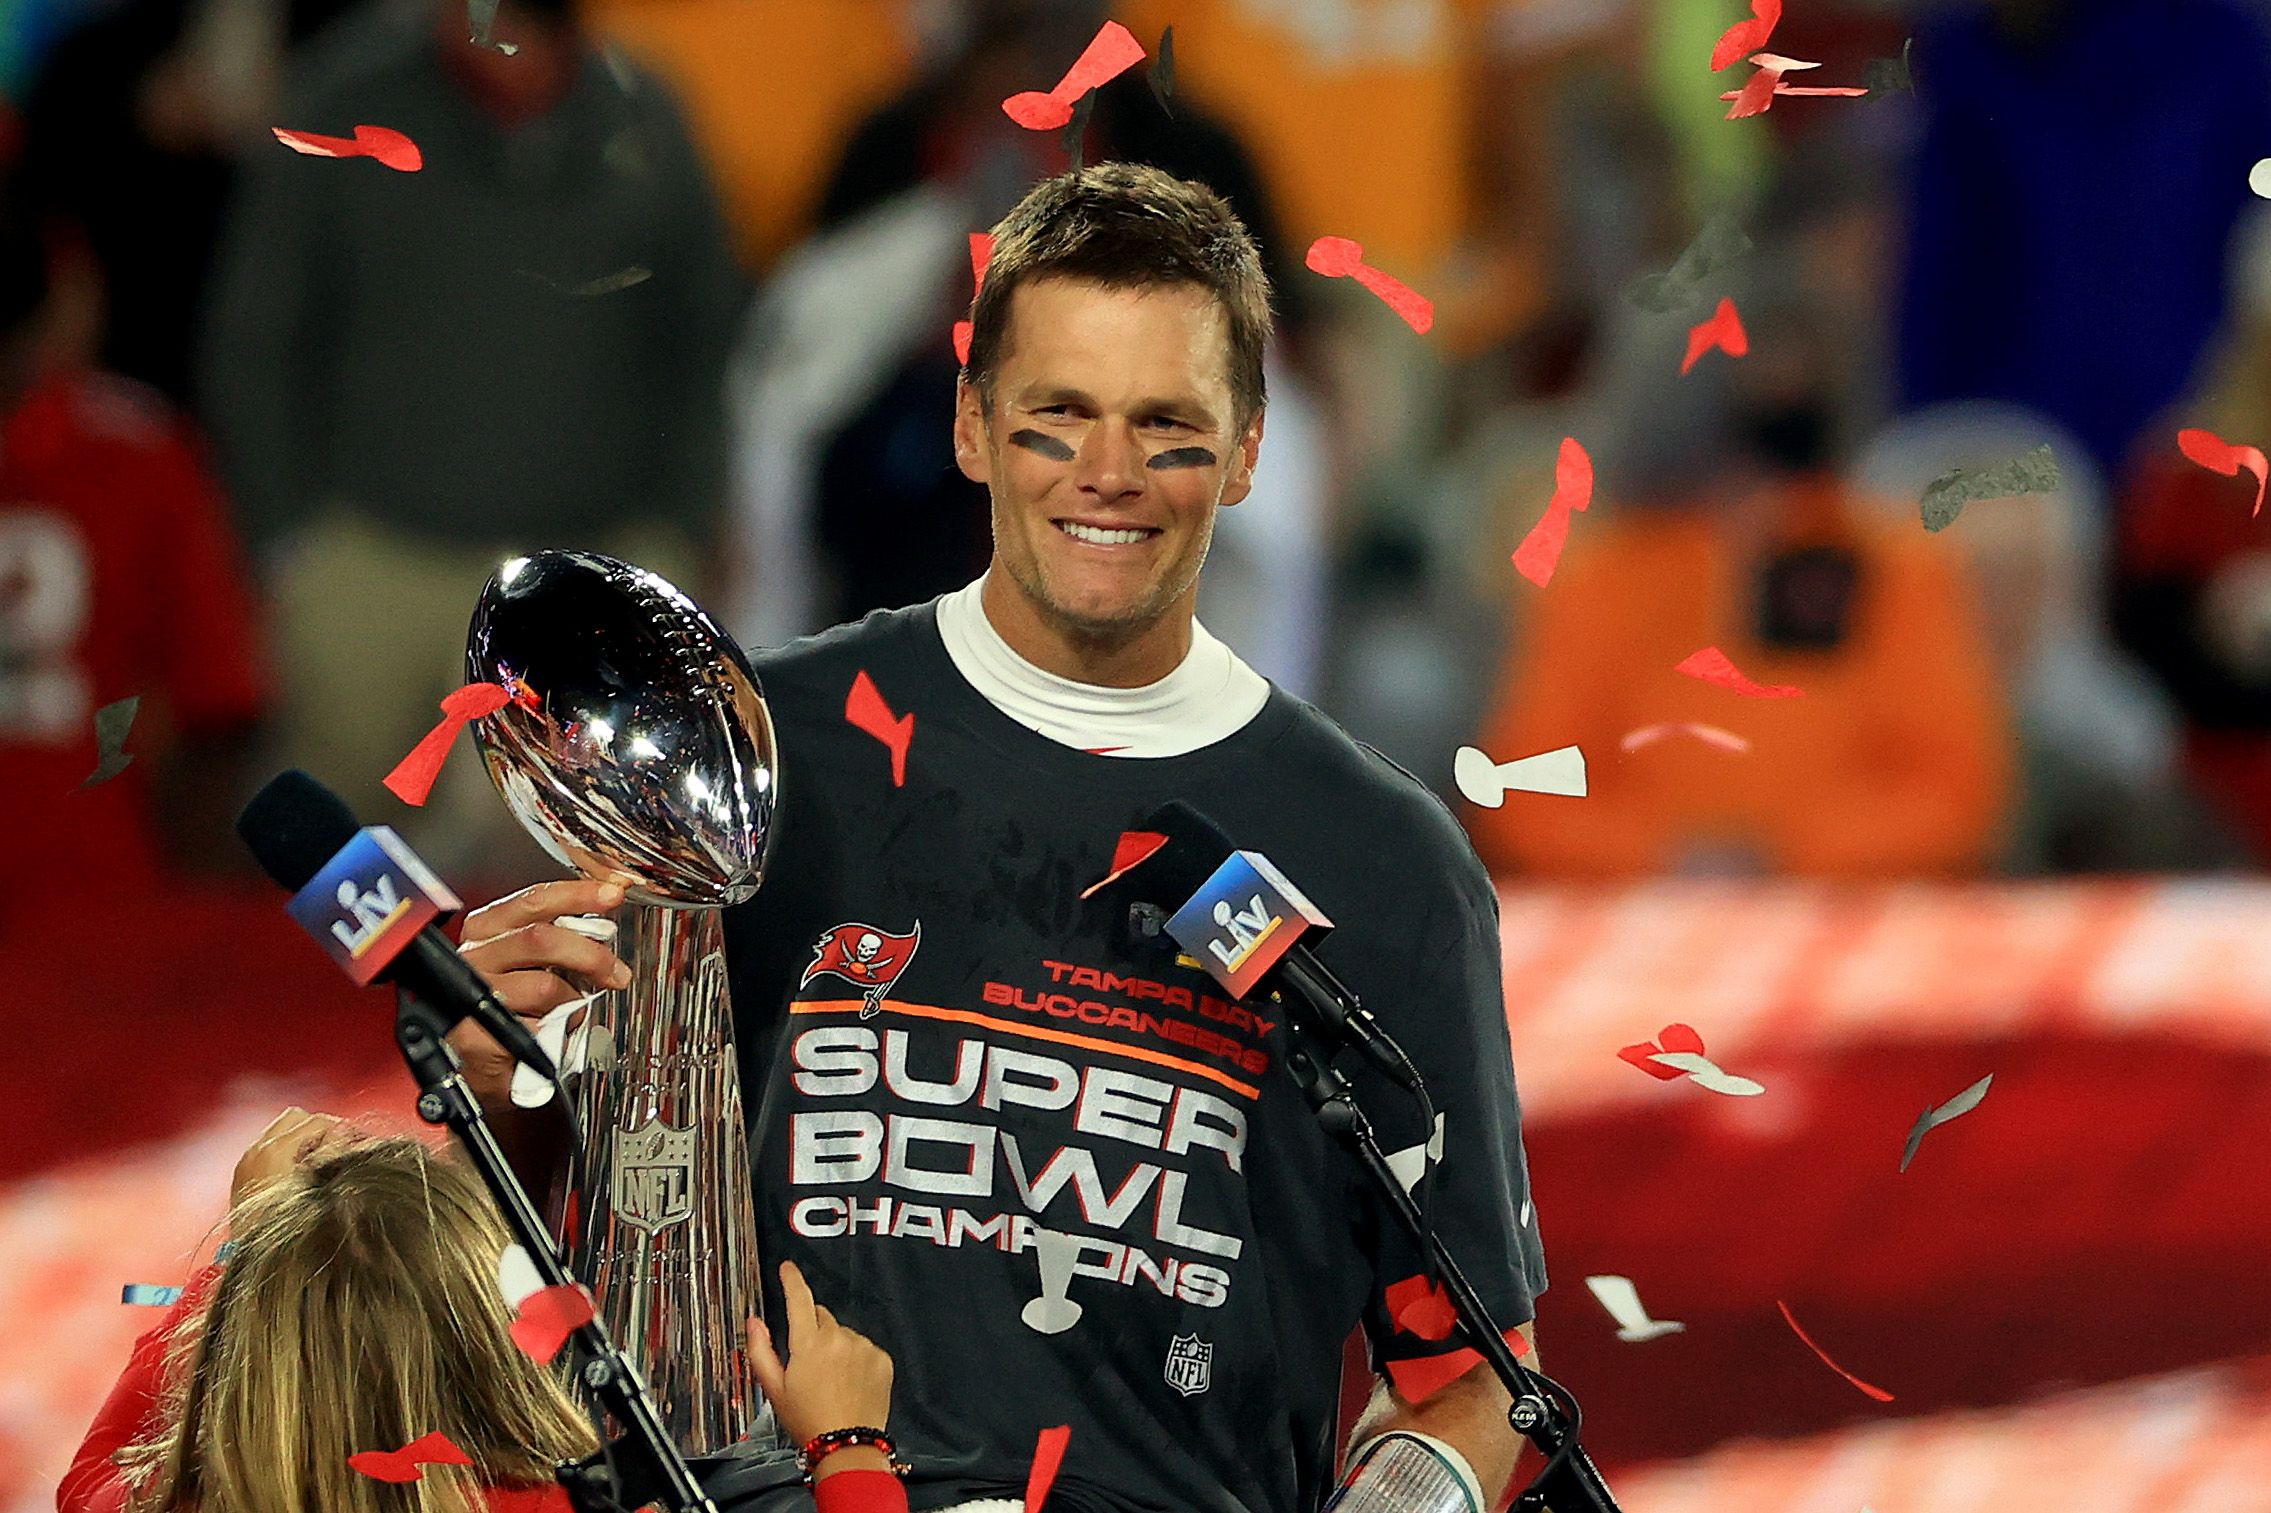 Tom Brady #12 of the Tampa Bay Buccaneers hoists the Vince Lombardi Trophy after winning Super Bowl LV at Raymond James Stadium on February 07, 2021 | Photo: Getty Images